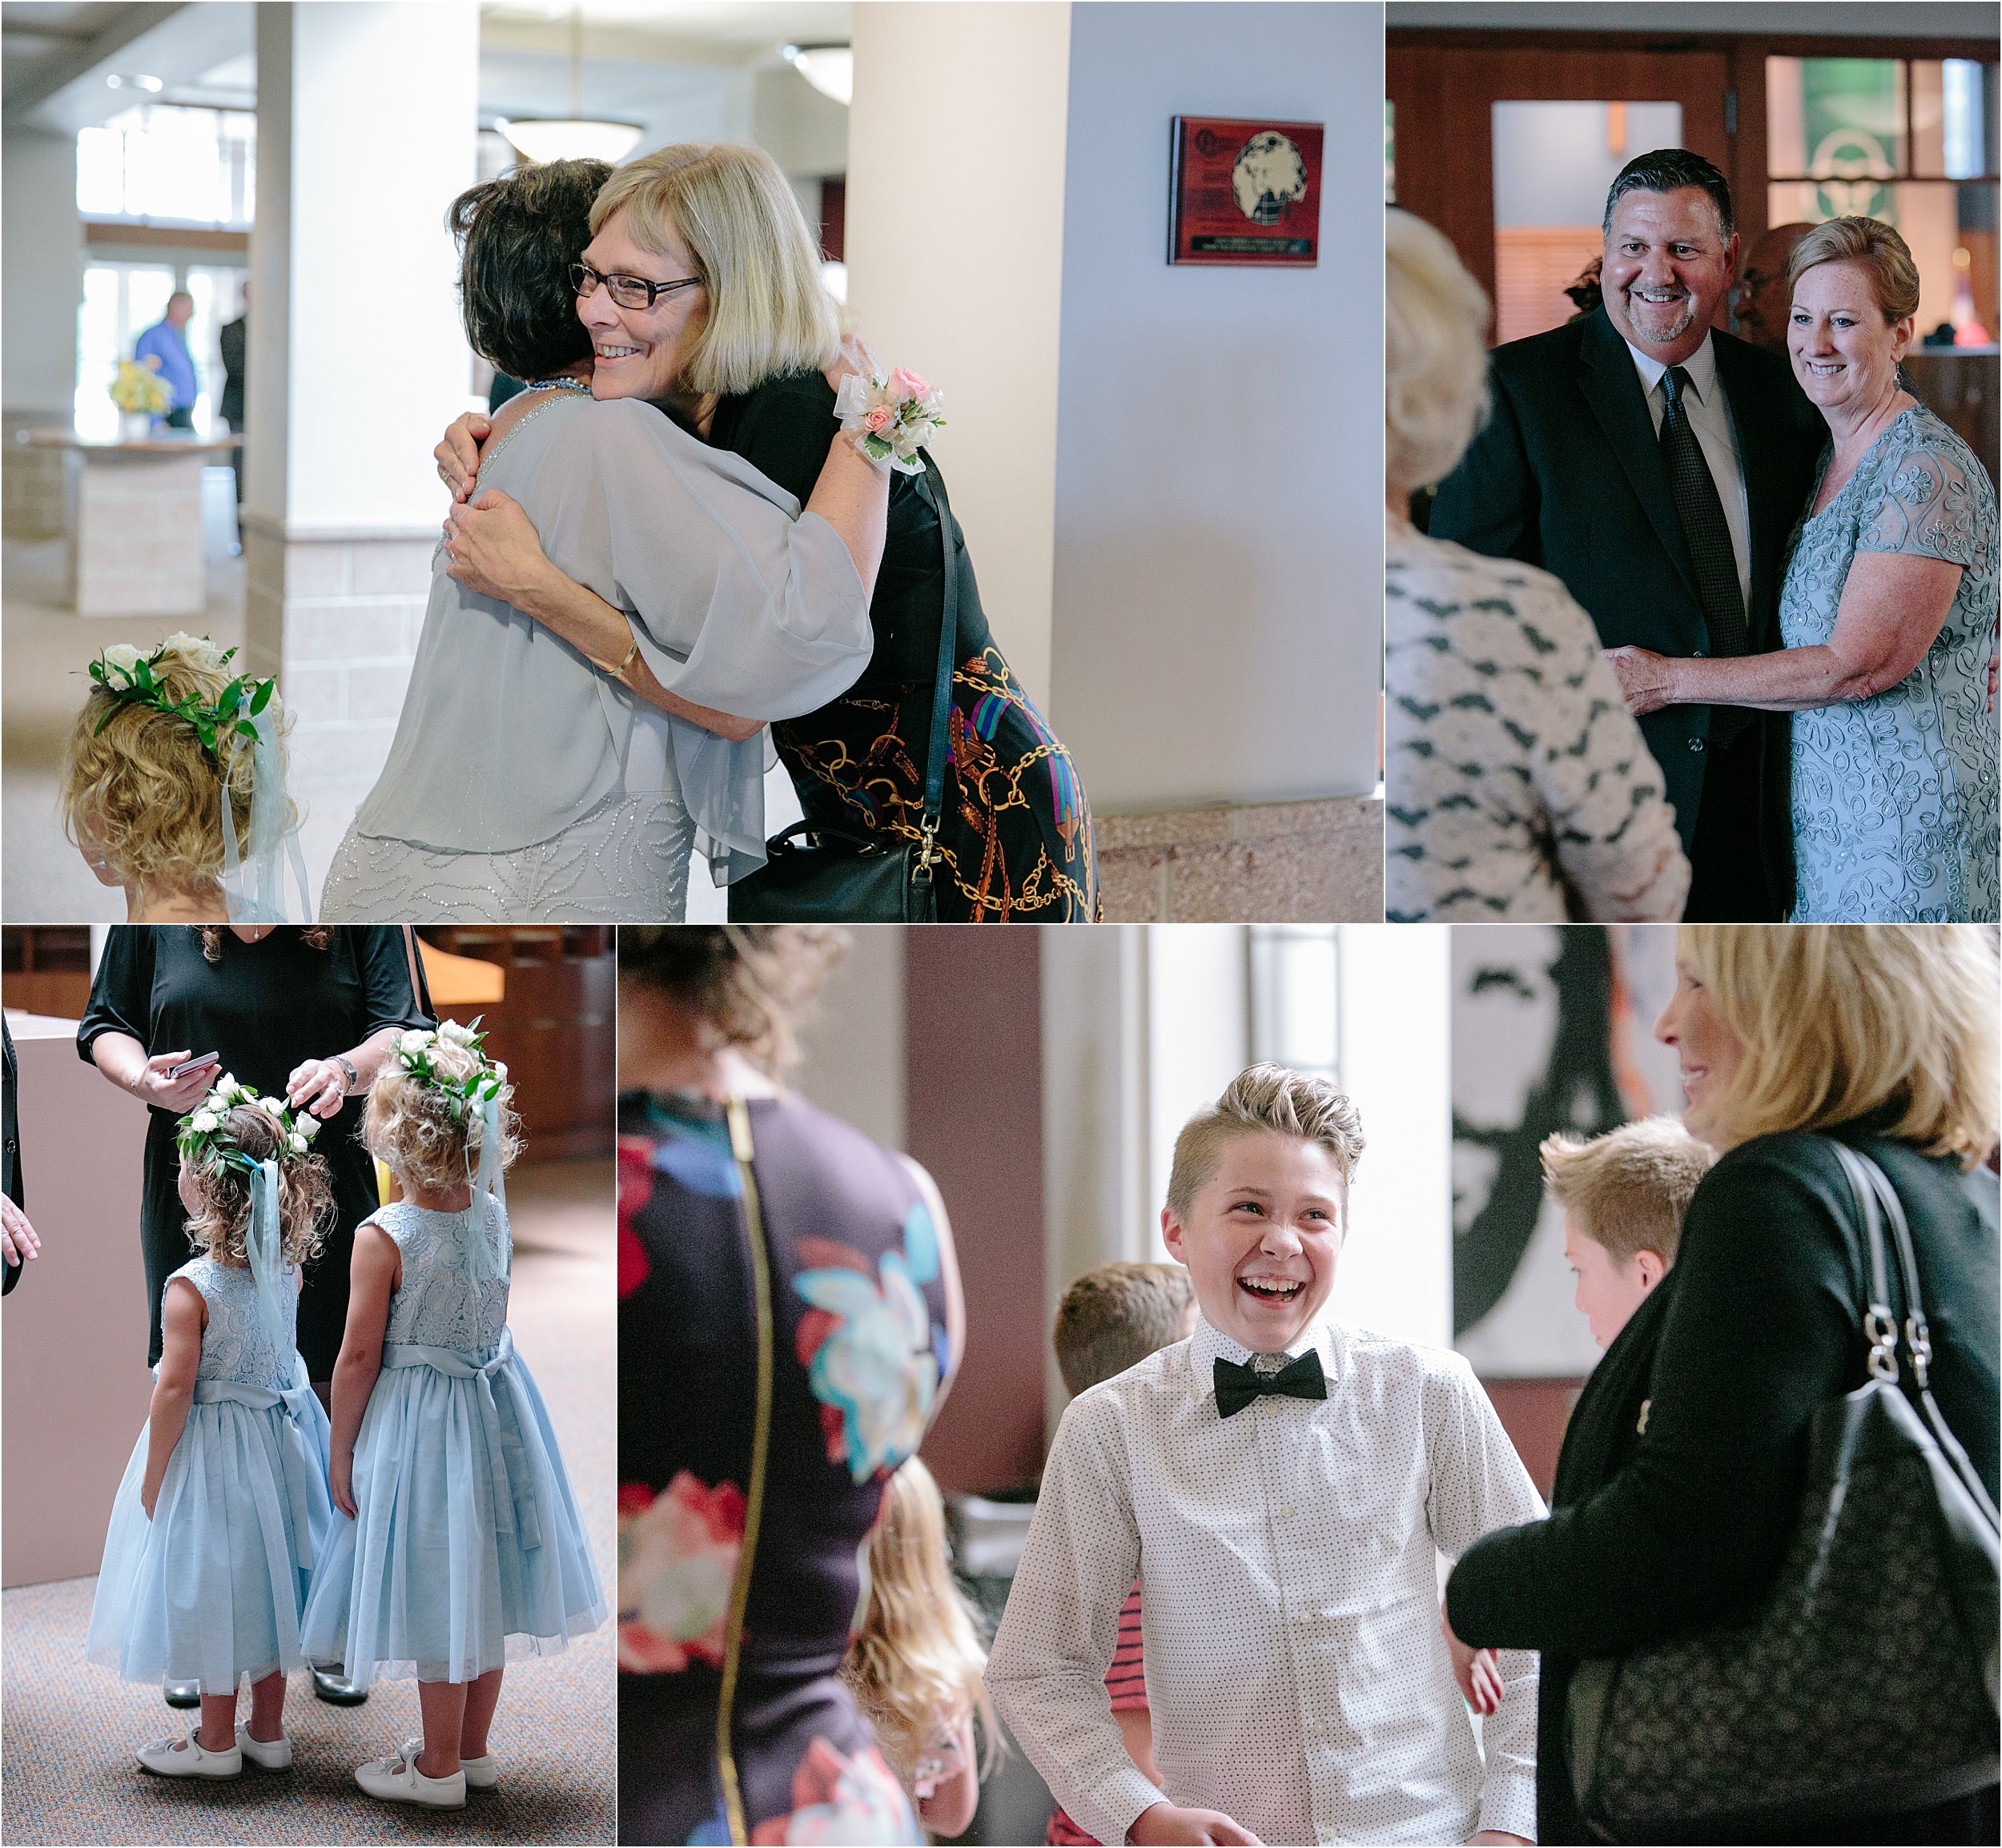 04-before-church-ceremony-guests-hugging.JPG